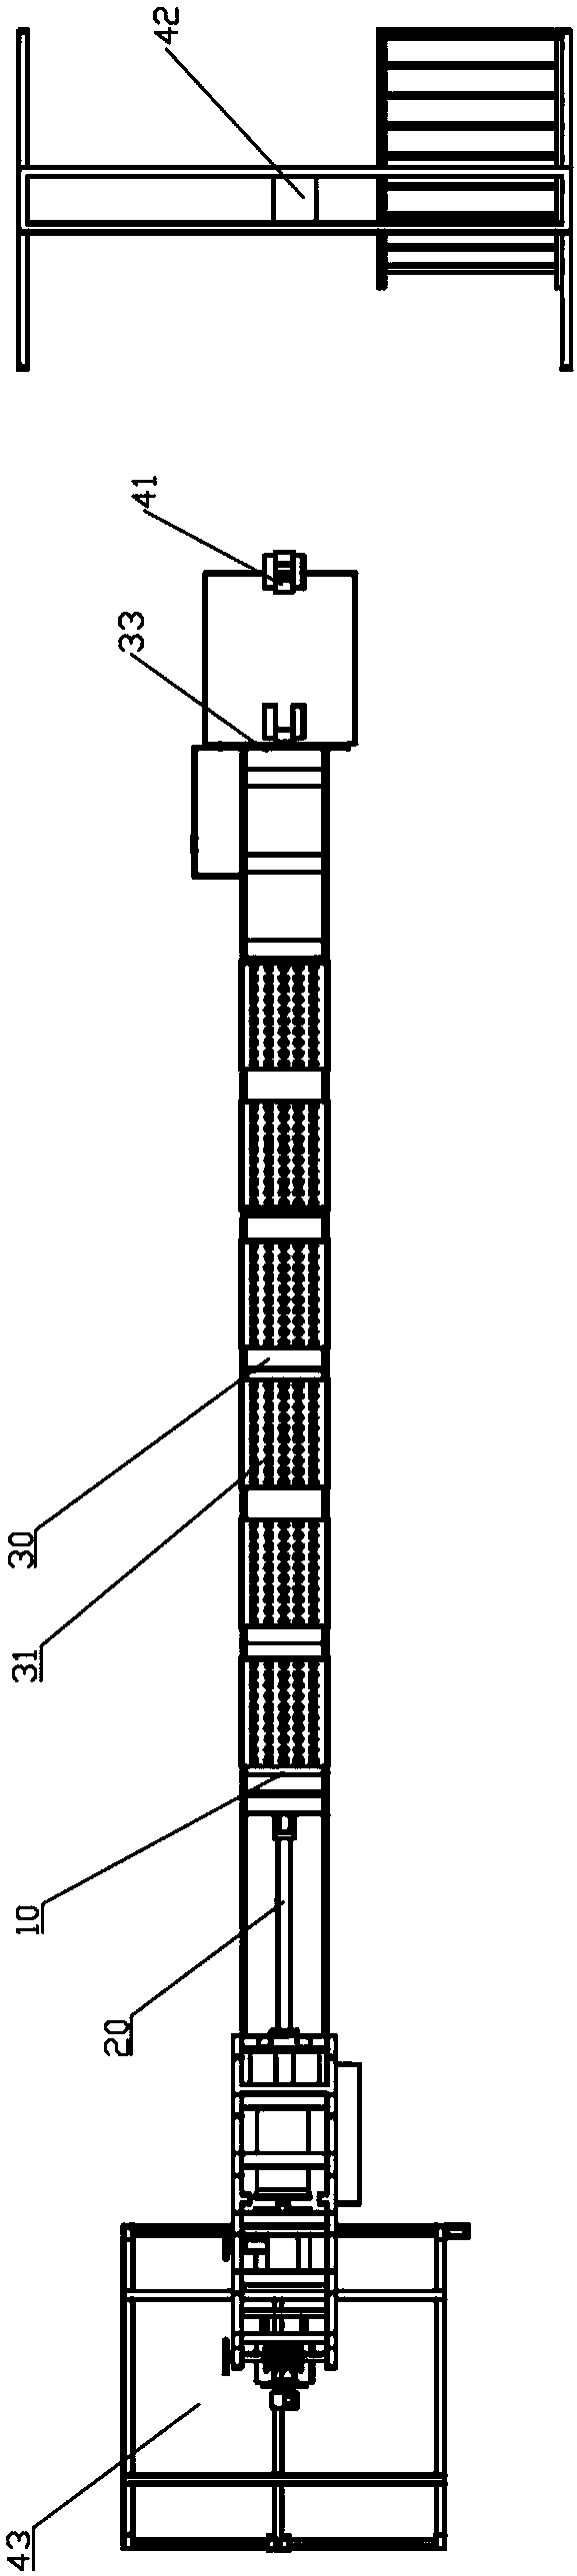 Iron chain breaking strength detection device